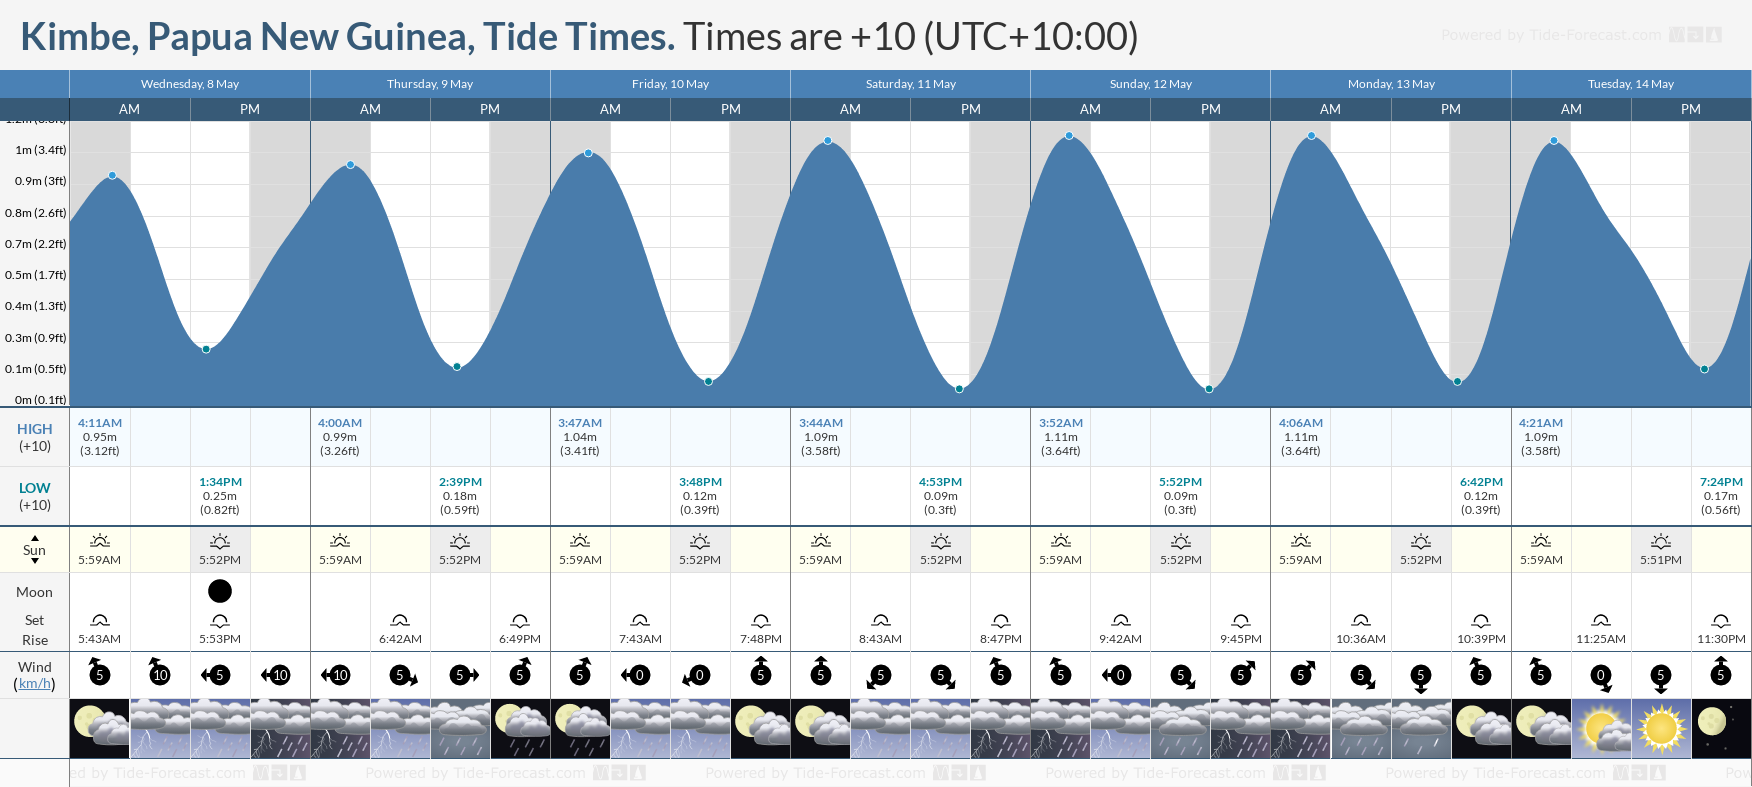 Kimbe, Papua New Guinea Tide Chart including high and low tide tide times for the next 7 days